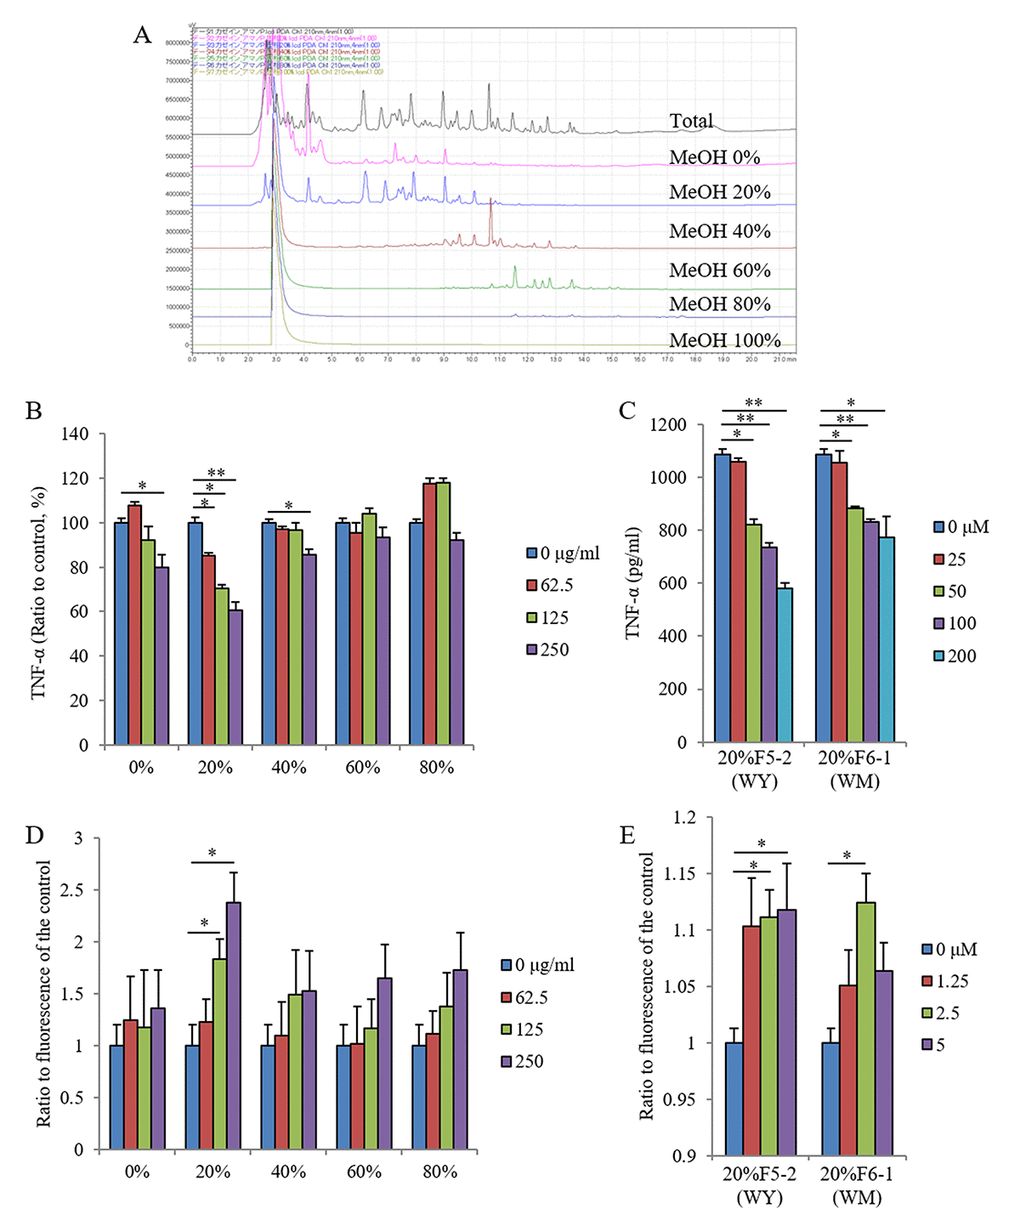 Effects of the fractions and peptides on inflammatory response and phagocytic activity in microglia. Casein protein was digested by using enzyme and fractionated by using a solid-phase column with 0%, 20%, 40%, 60%, and 80% methanol. (A) Chromatograph of each fraction using HPLC. (B, C) Effects of each fraction of methanol elution and dipeptides of WY and WM on inflammatory responses determined by using CD11b-positive primary microglia, respectively. The TNF-α production in supernatant of microglia culture pretreated with each fraction and dipeptides and then treated with LPS. (D, E) Effects of each fraction and the dipeptides on phagocytosis of Aβ determined by using CD11b-positive primary microglia, respectively. The intracellular fluorescence of Aβ-FAM in the microglia treated with each sample. Data are means ± SEM of 3–5 wells per sample. The p-values were calculated by using one-way ANOVA followed by Dunnett test. *p p 